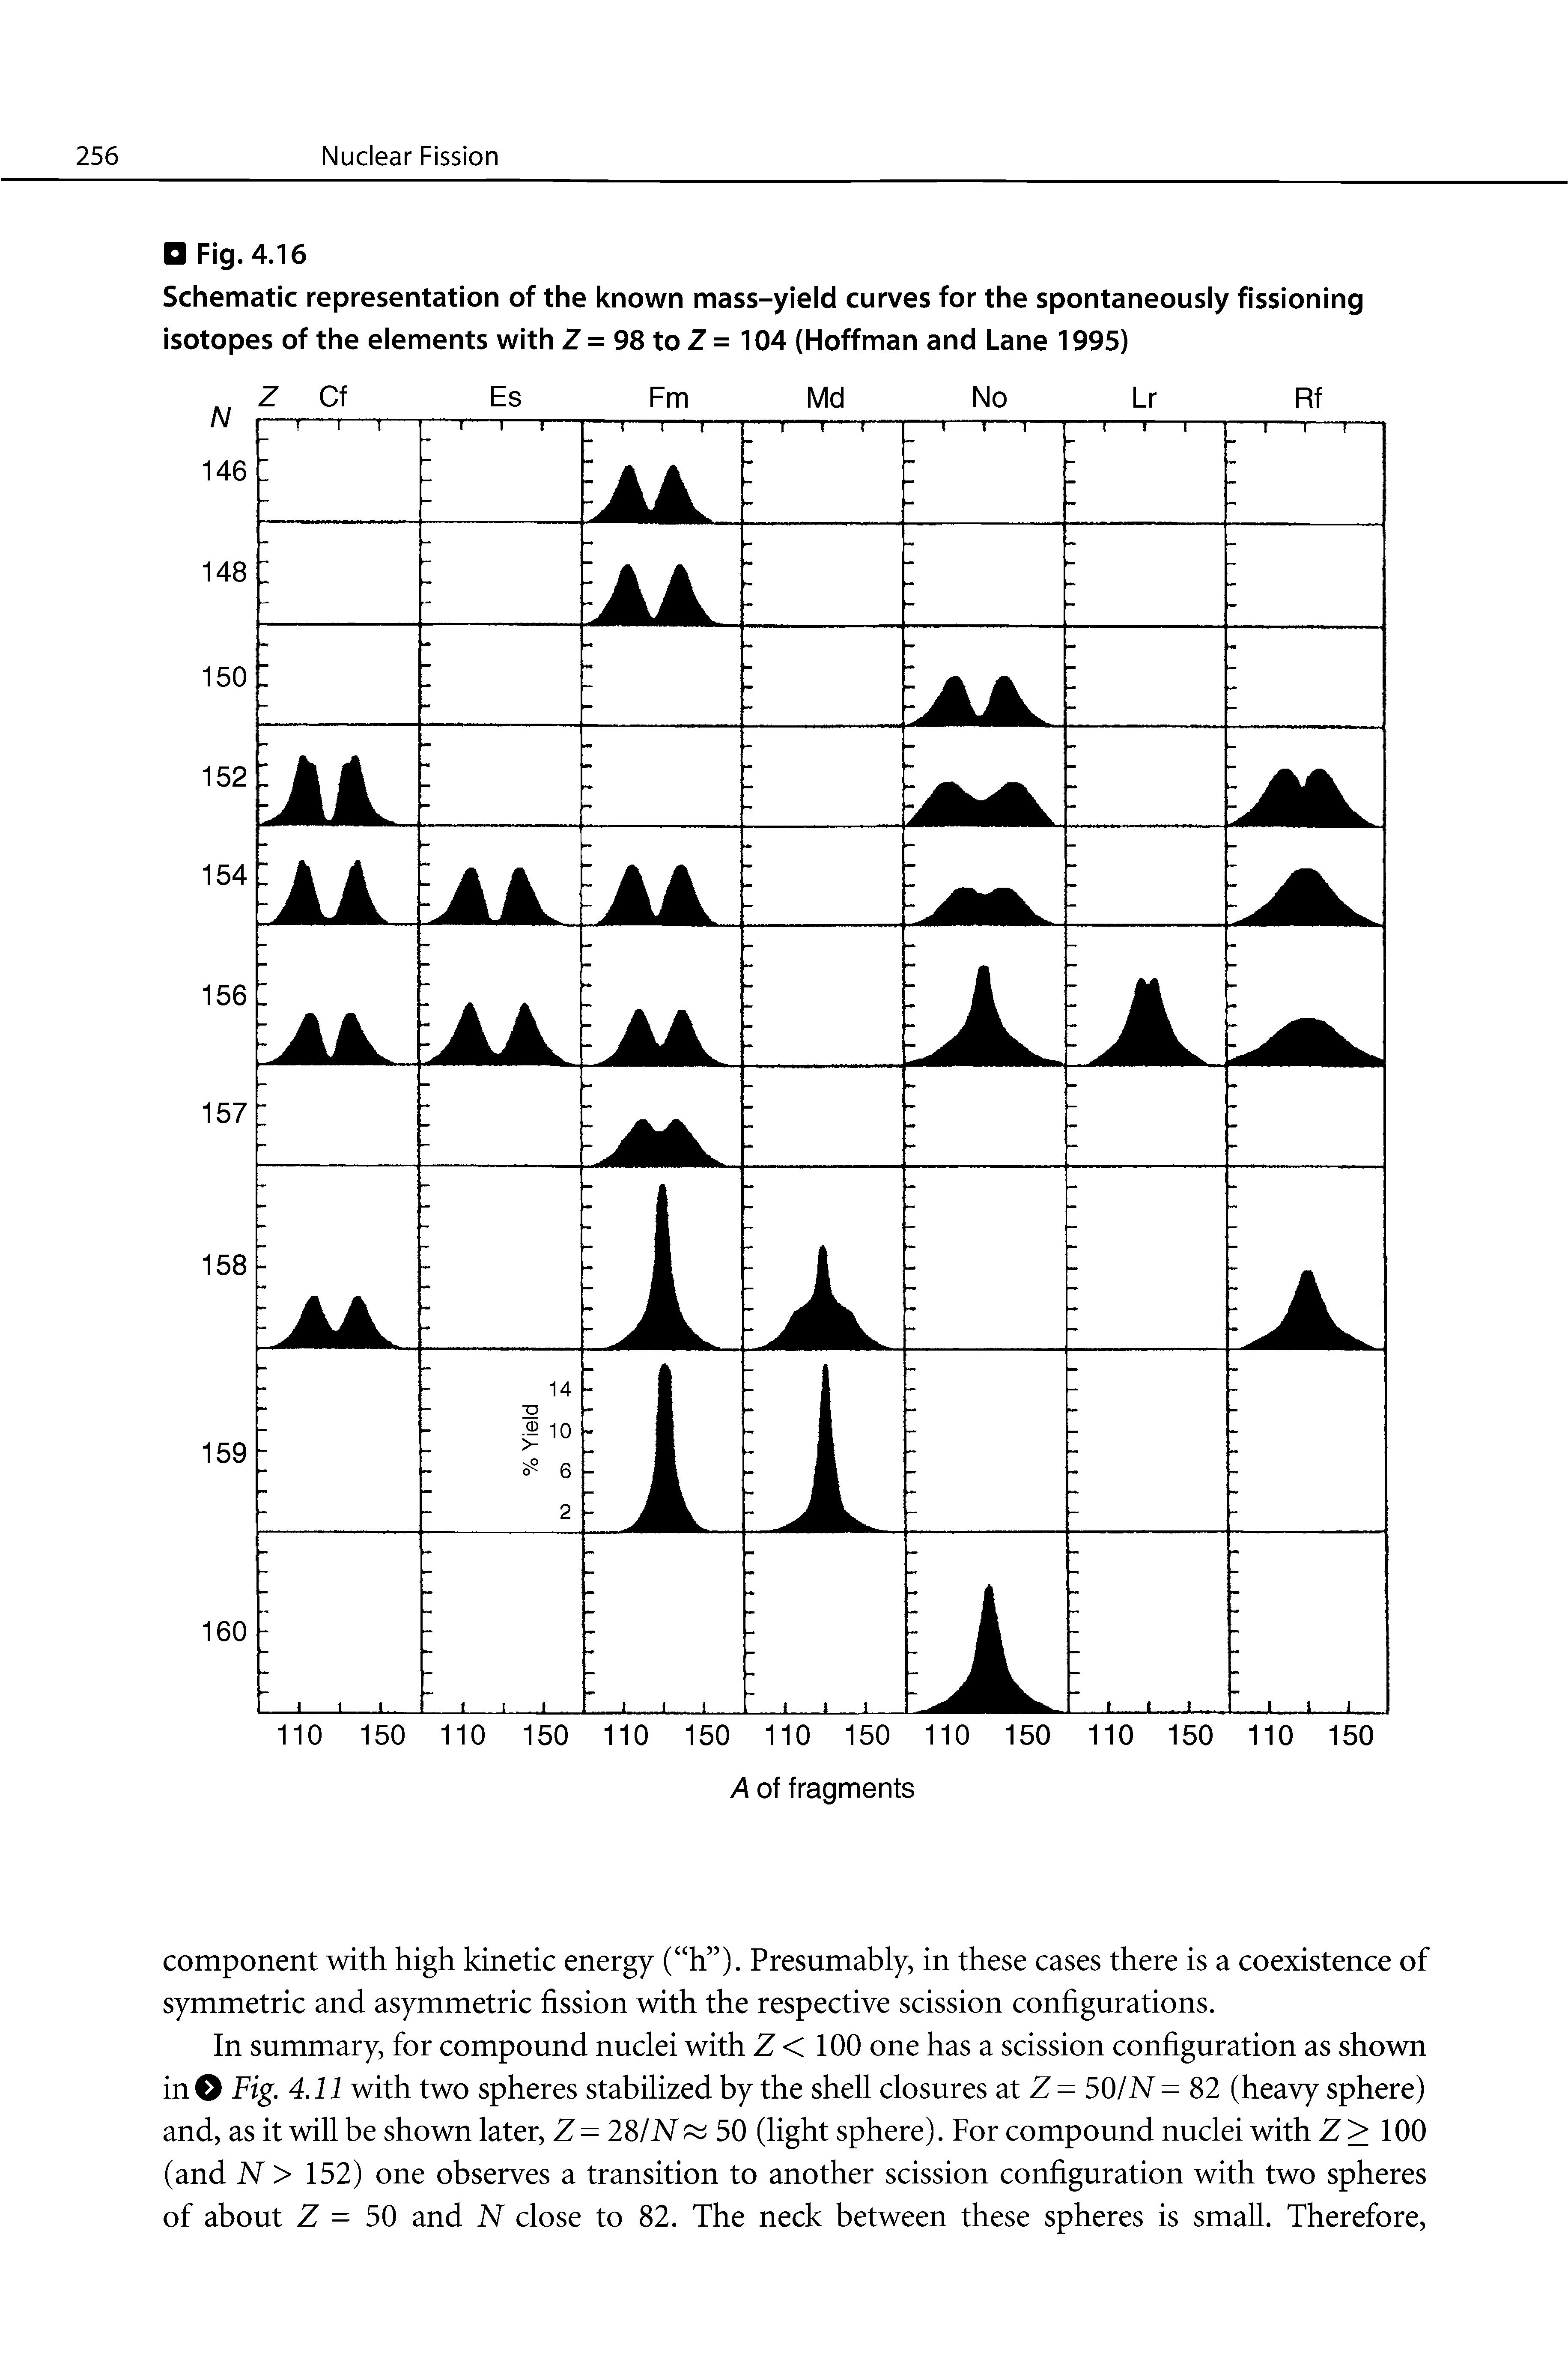 Schematic representation of the known mass-yield curves for the spontaneously fissioning isotopes of the elements with Z = 98 to Z = 104 (Hoffman and Lane 1995)...